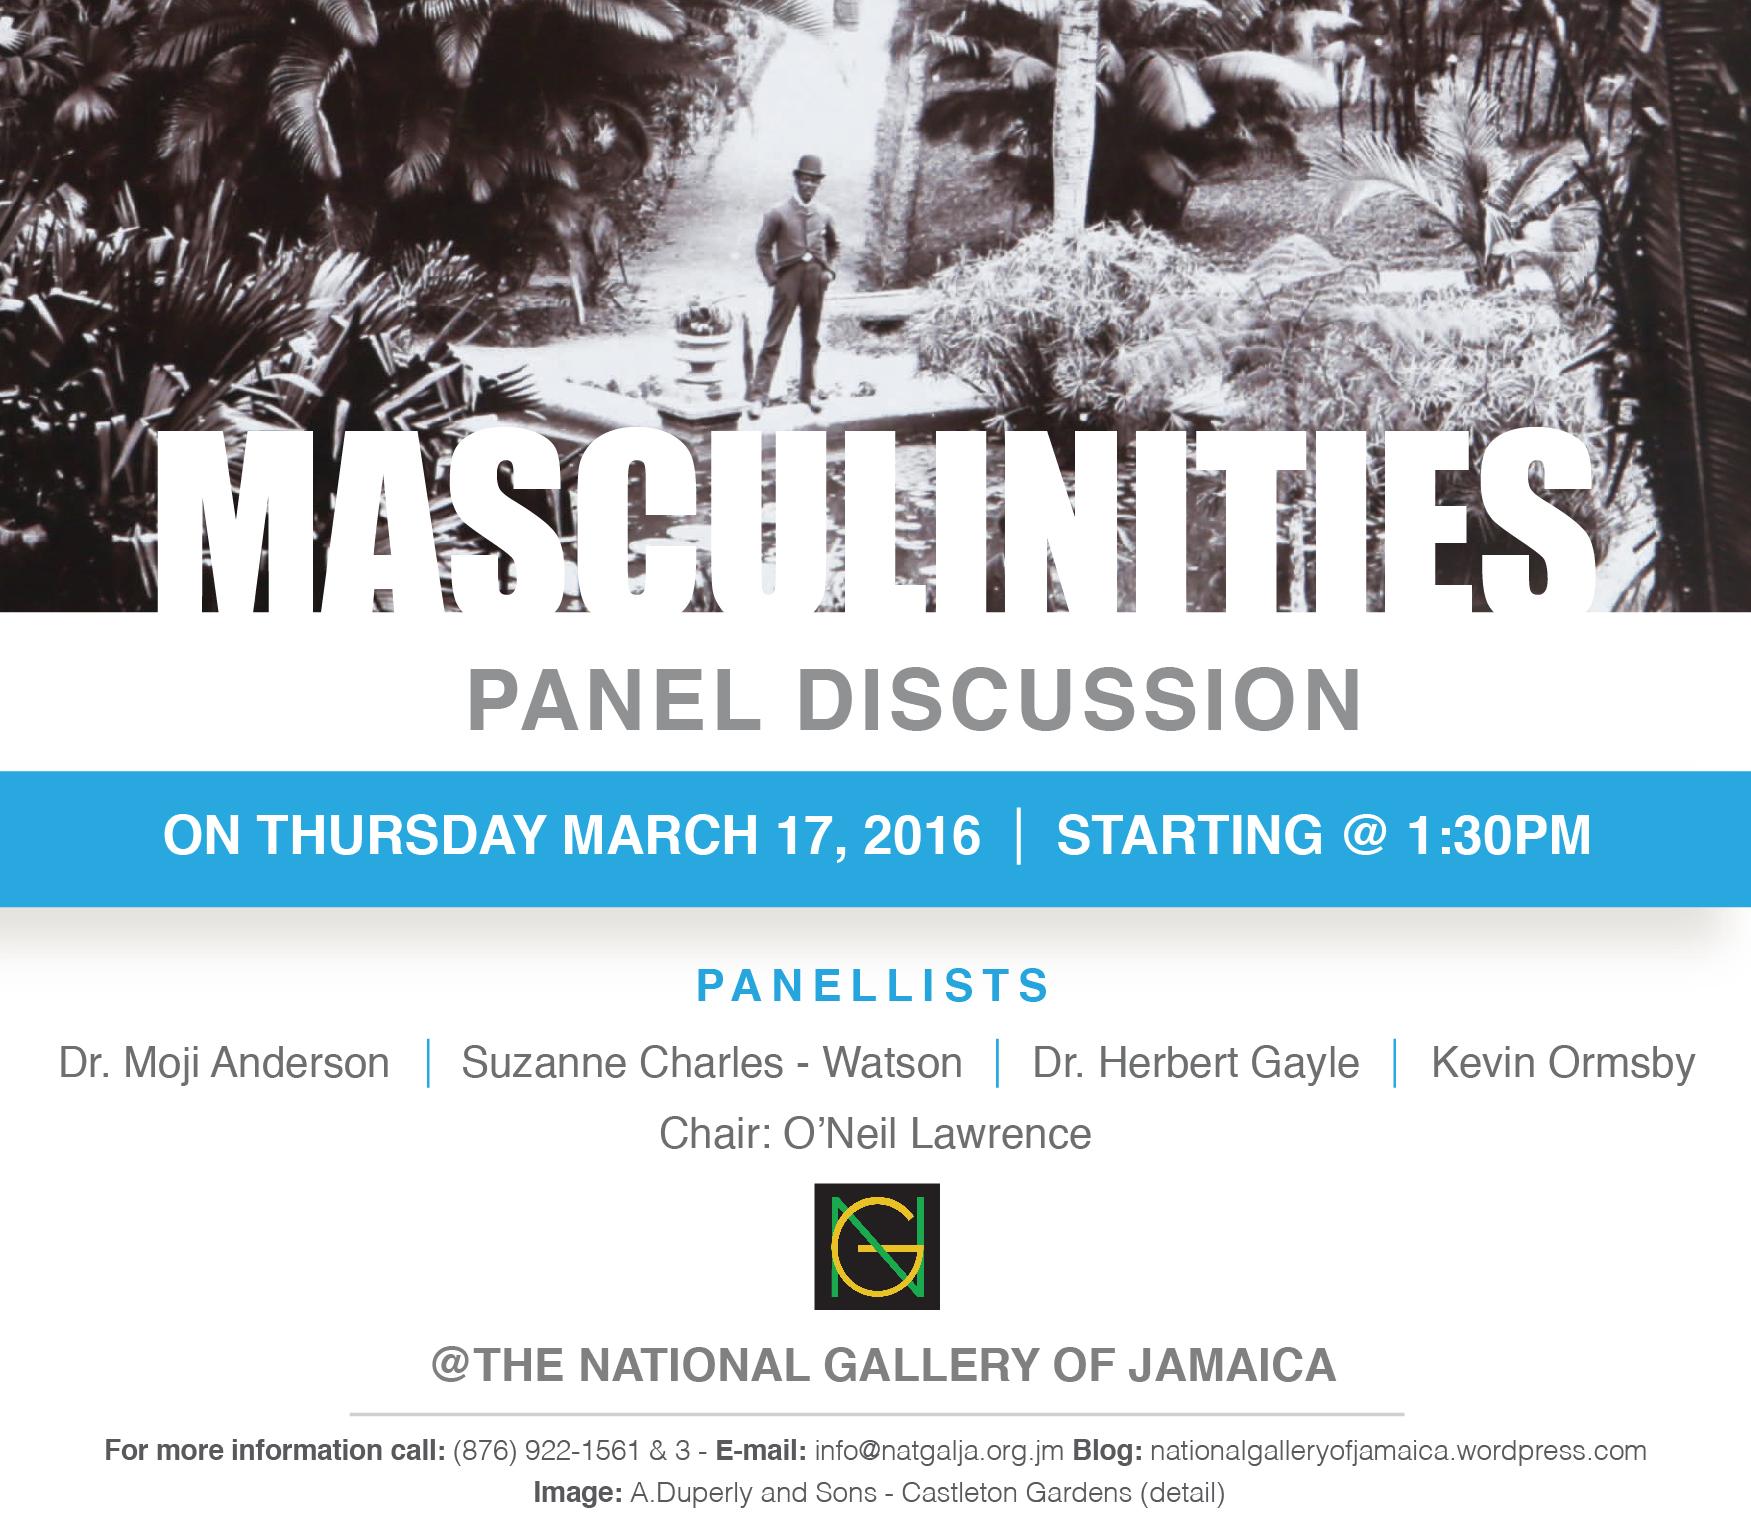 Panel Discussion on Masculinities